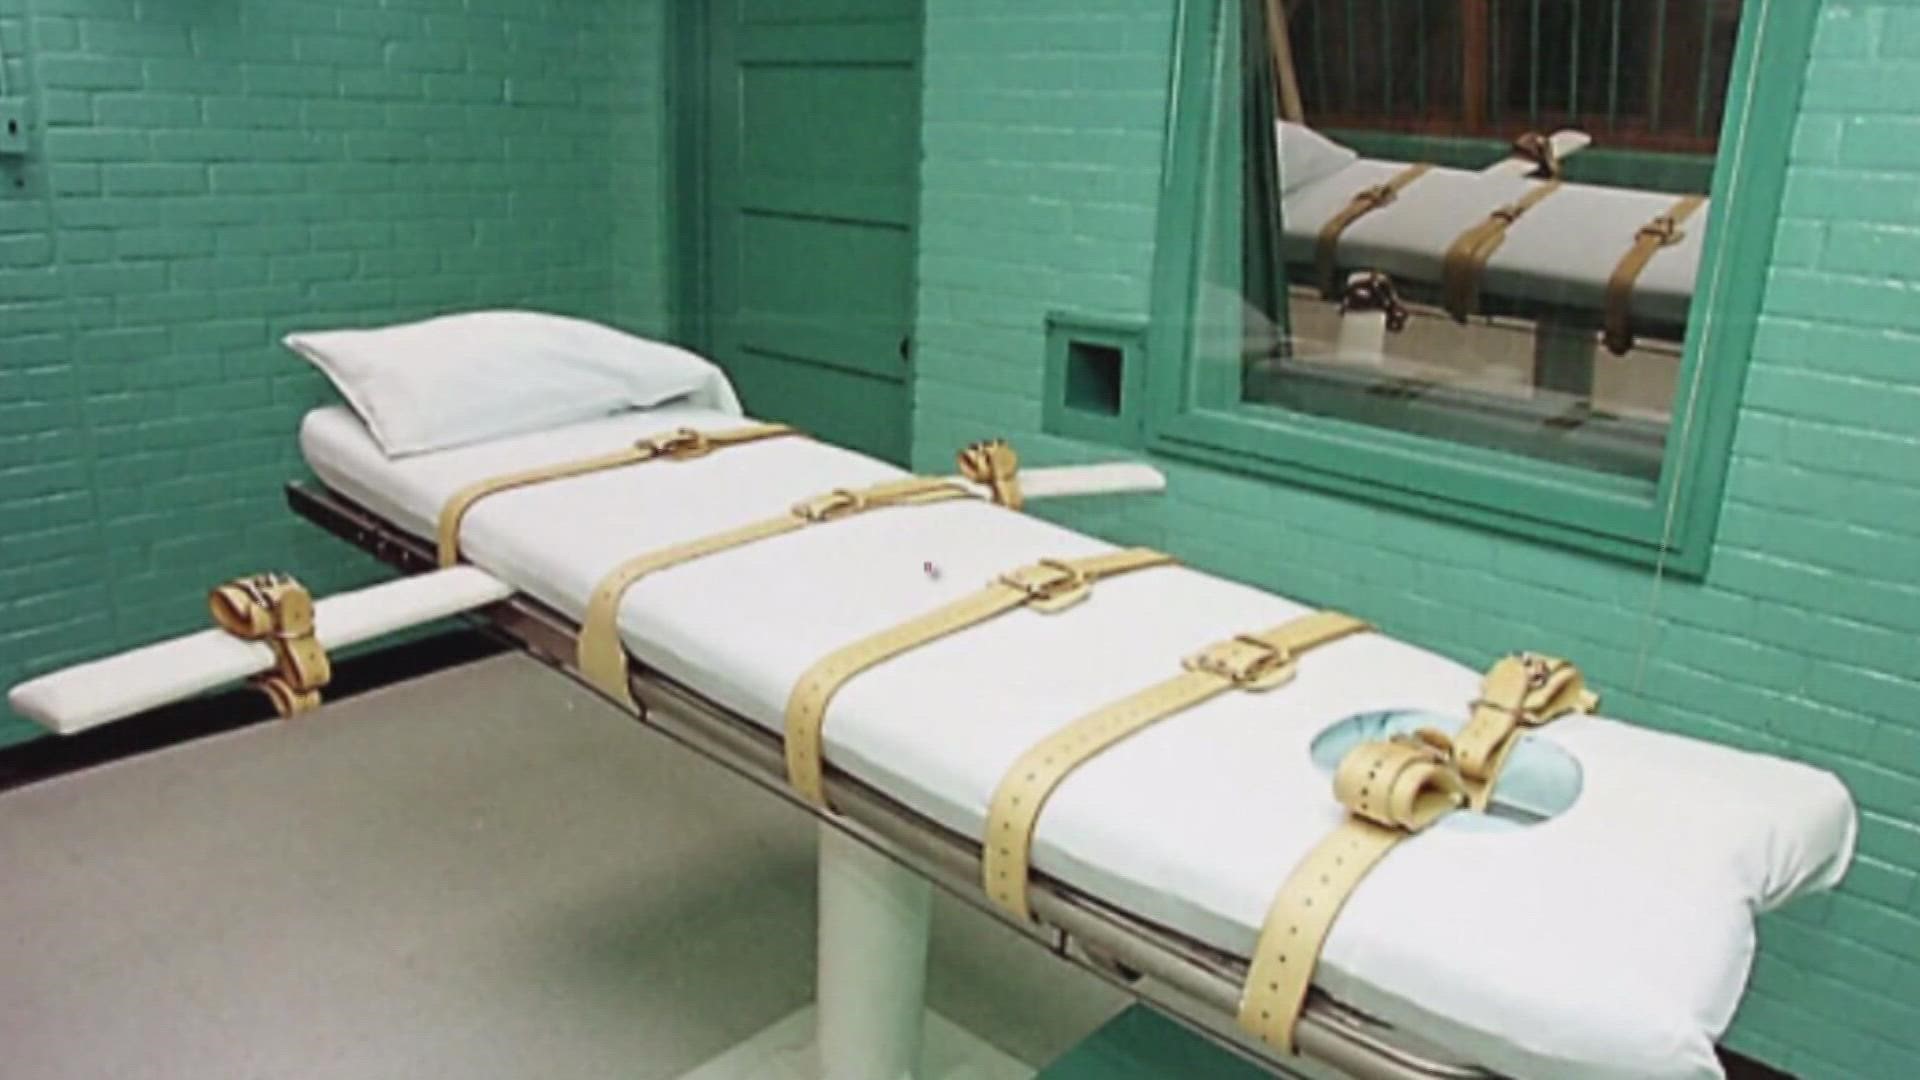 Governor Issues Review Of Capital Punishment Protocols In Arizona